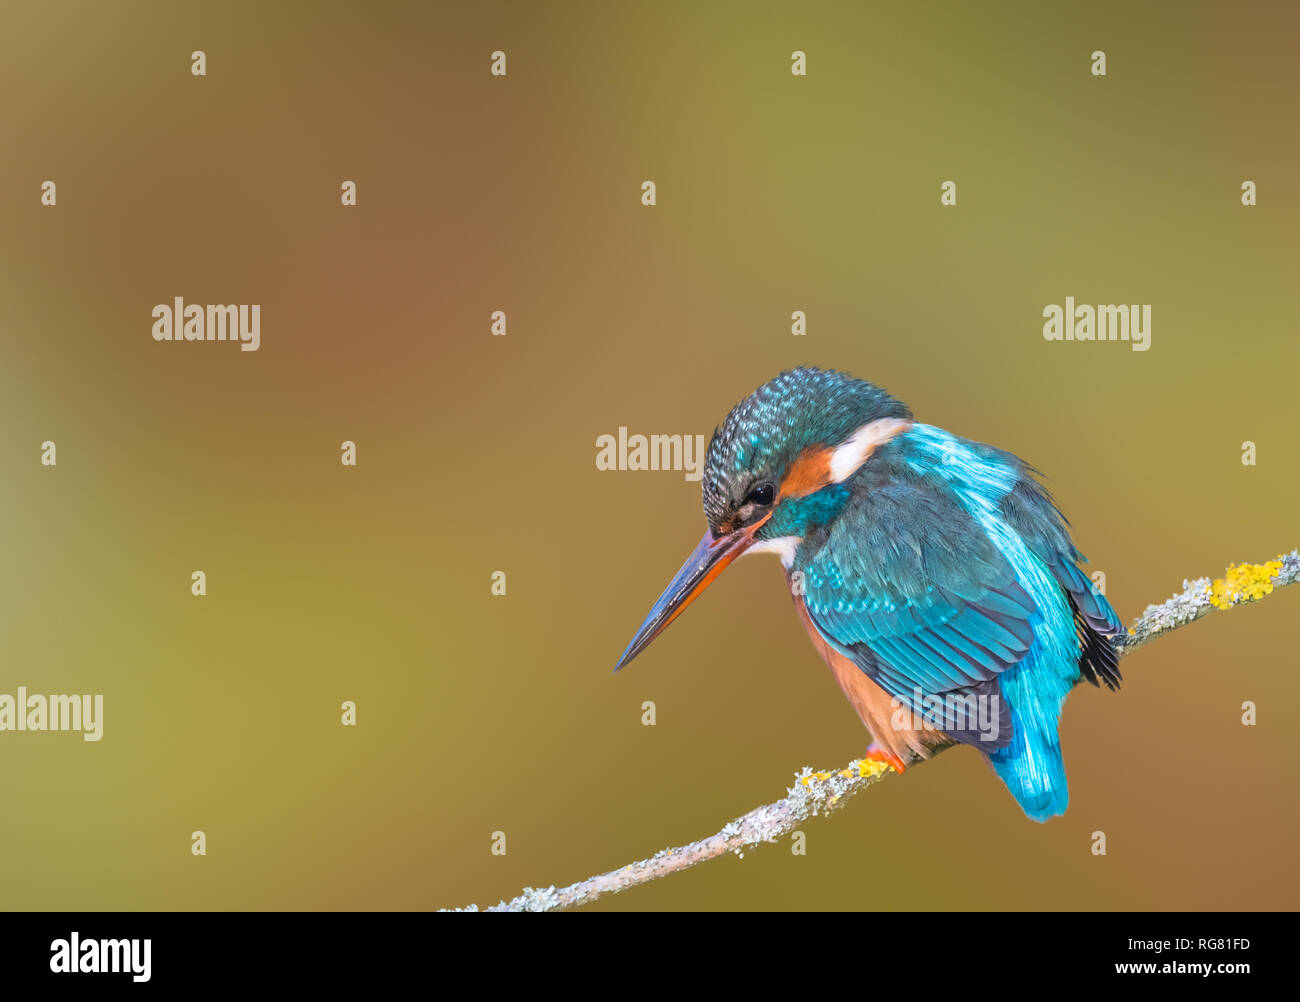 Adult Common Kingfisher (Alcedo atthis) perched on a tree branch in Winter in West Sussex, England, UK. With copy space. Copyspace. Stock Photo